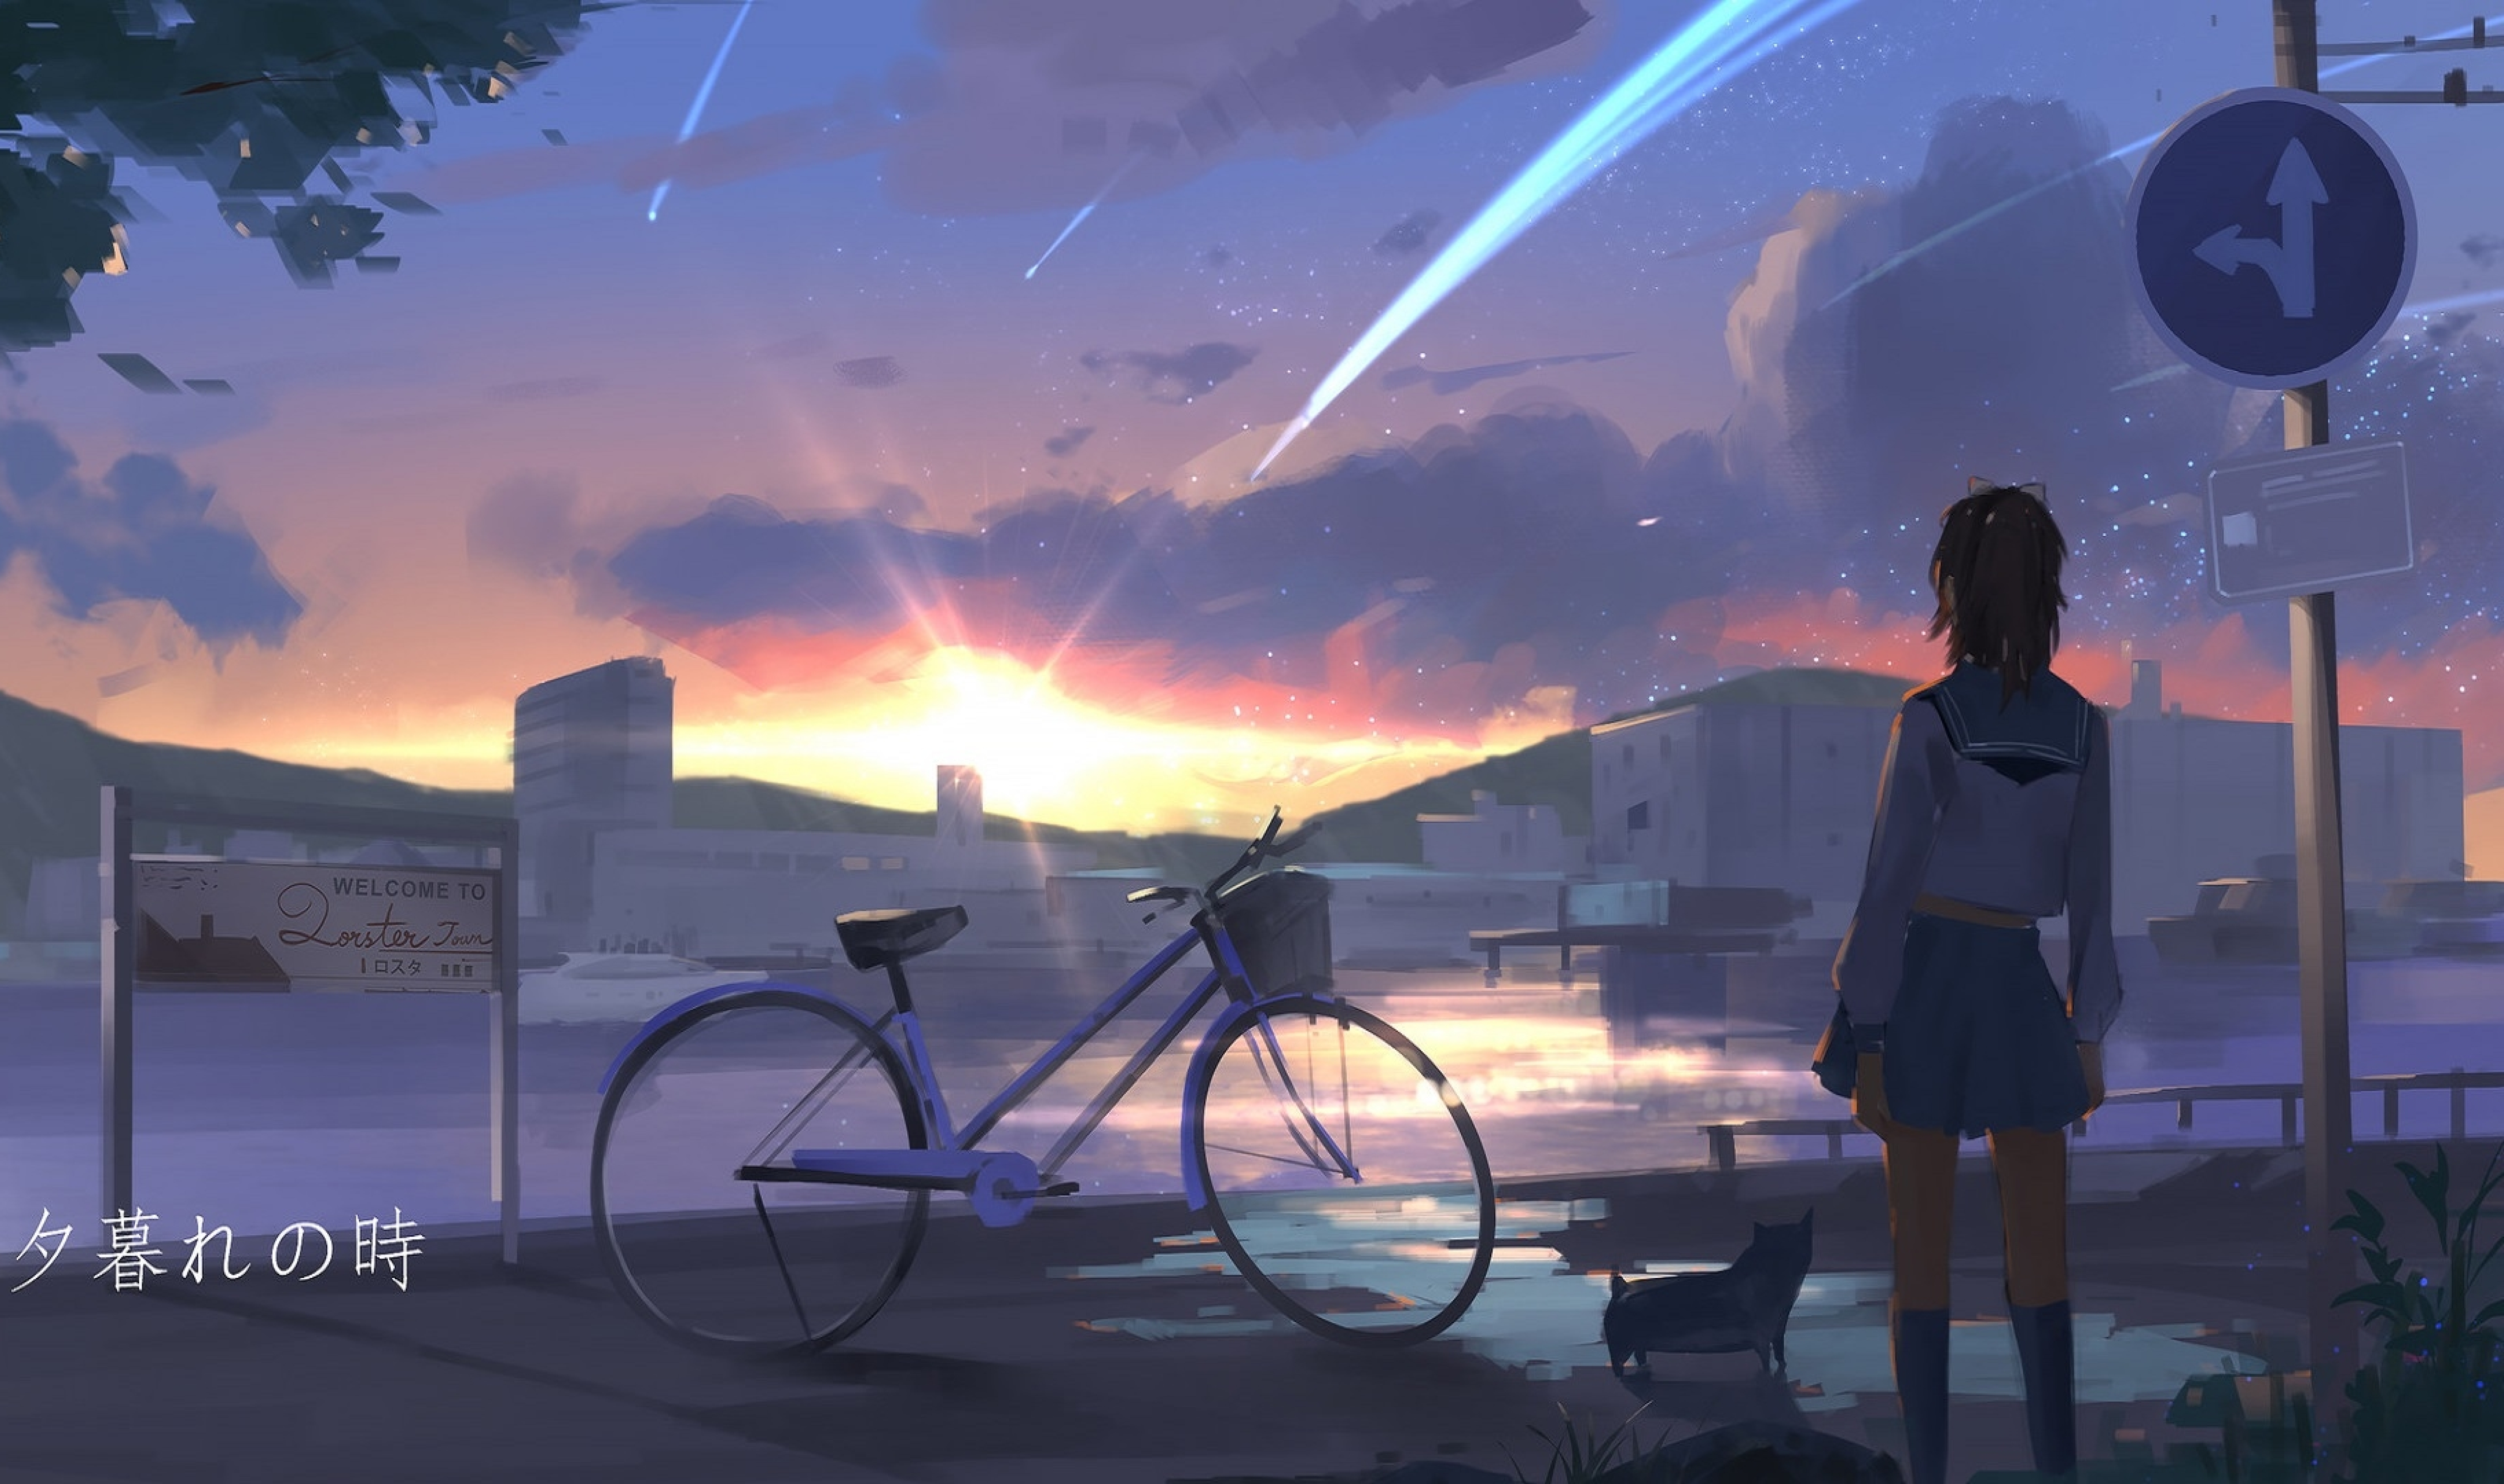 7680x4552 Alone Girl waiting for Sunrise 7680x4552 Resolution Wallpaper, HD  Anime 4K Wallpapers, Images, Photos and Background - Wallpapers Den